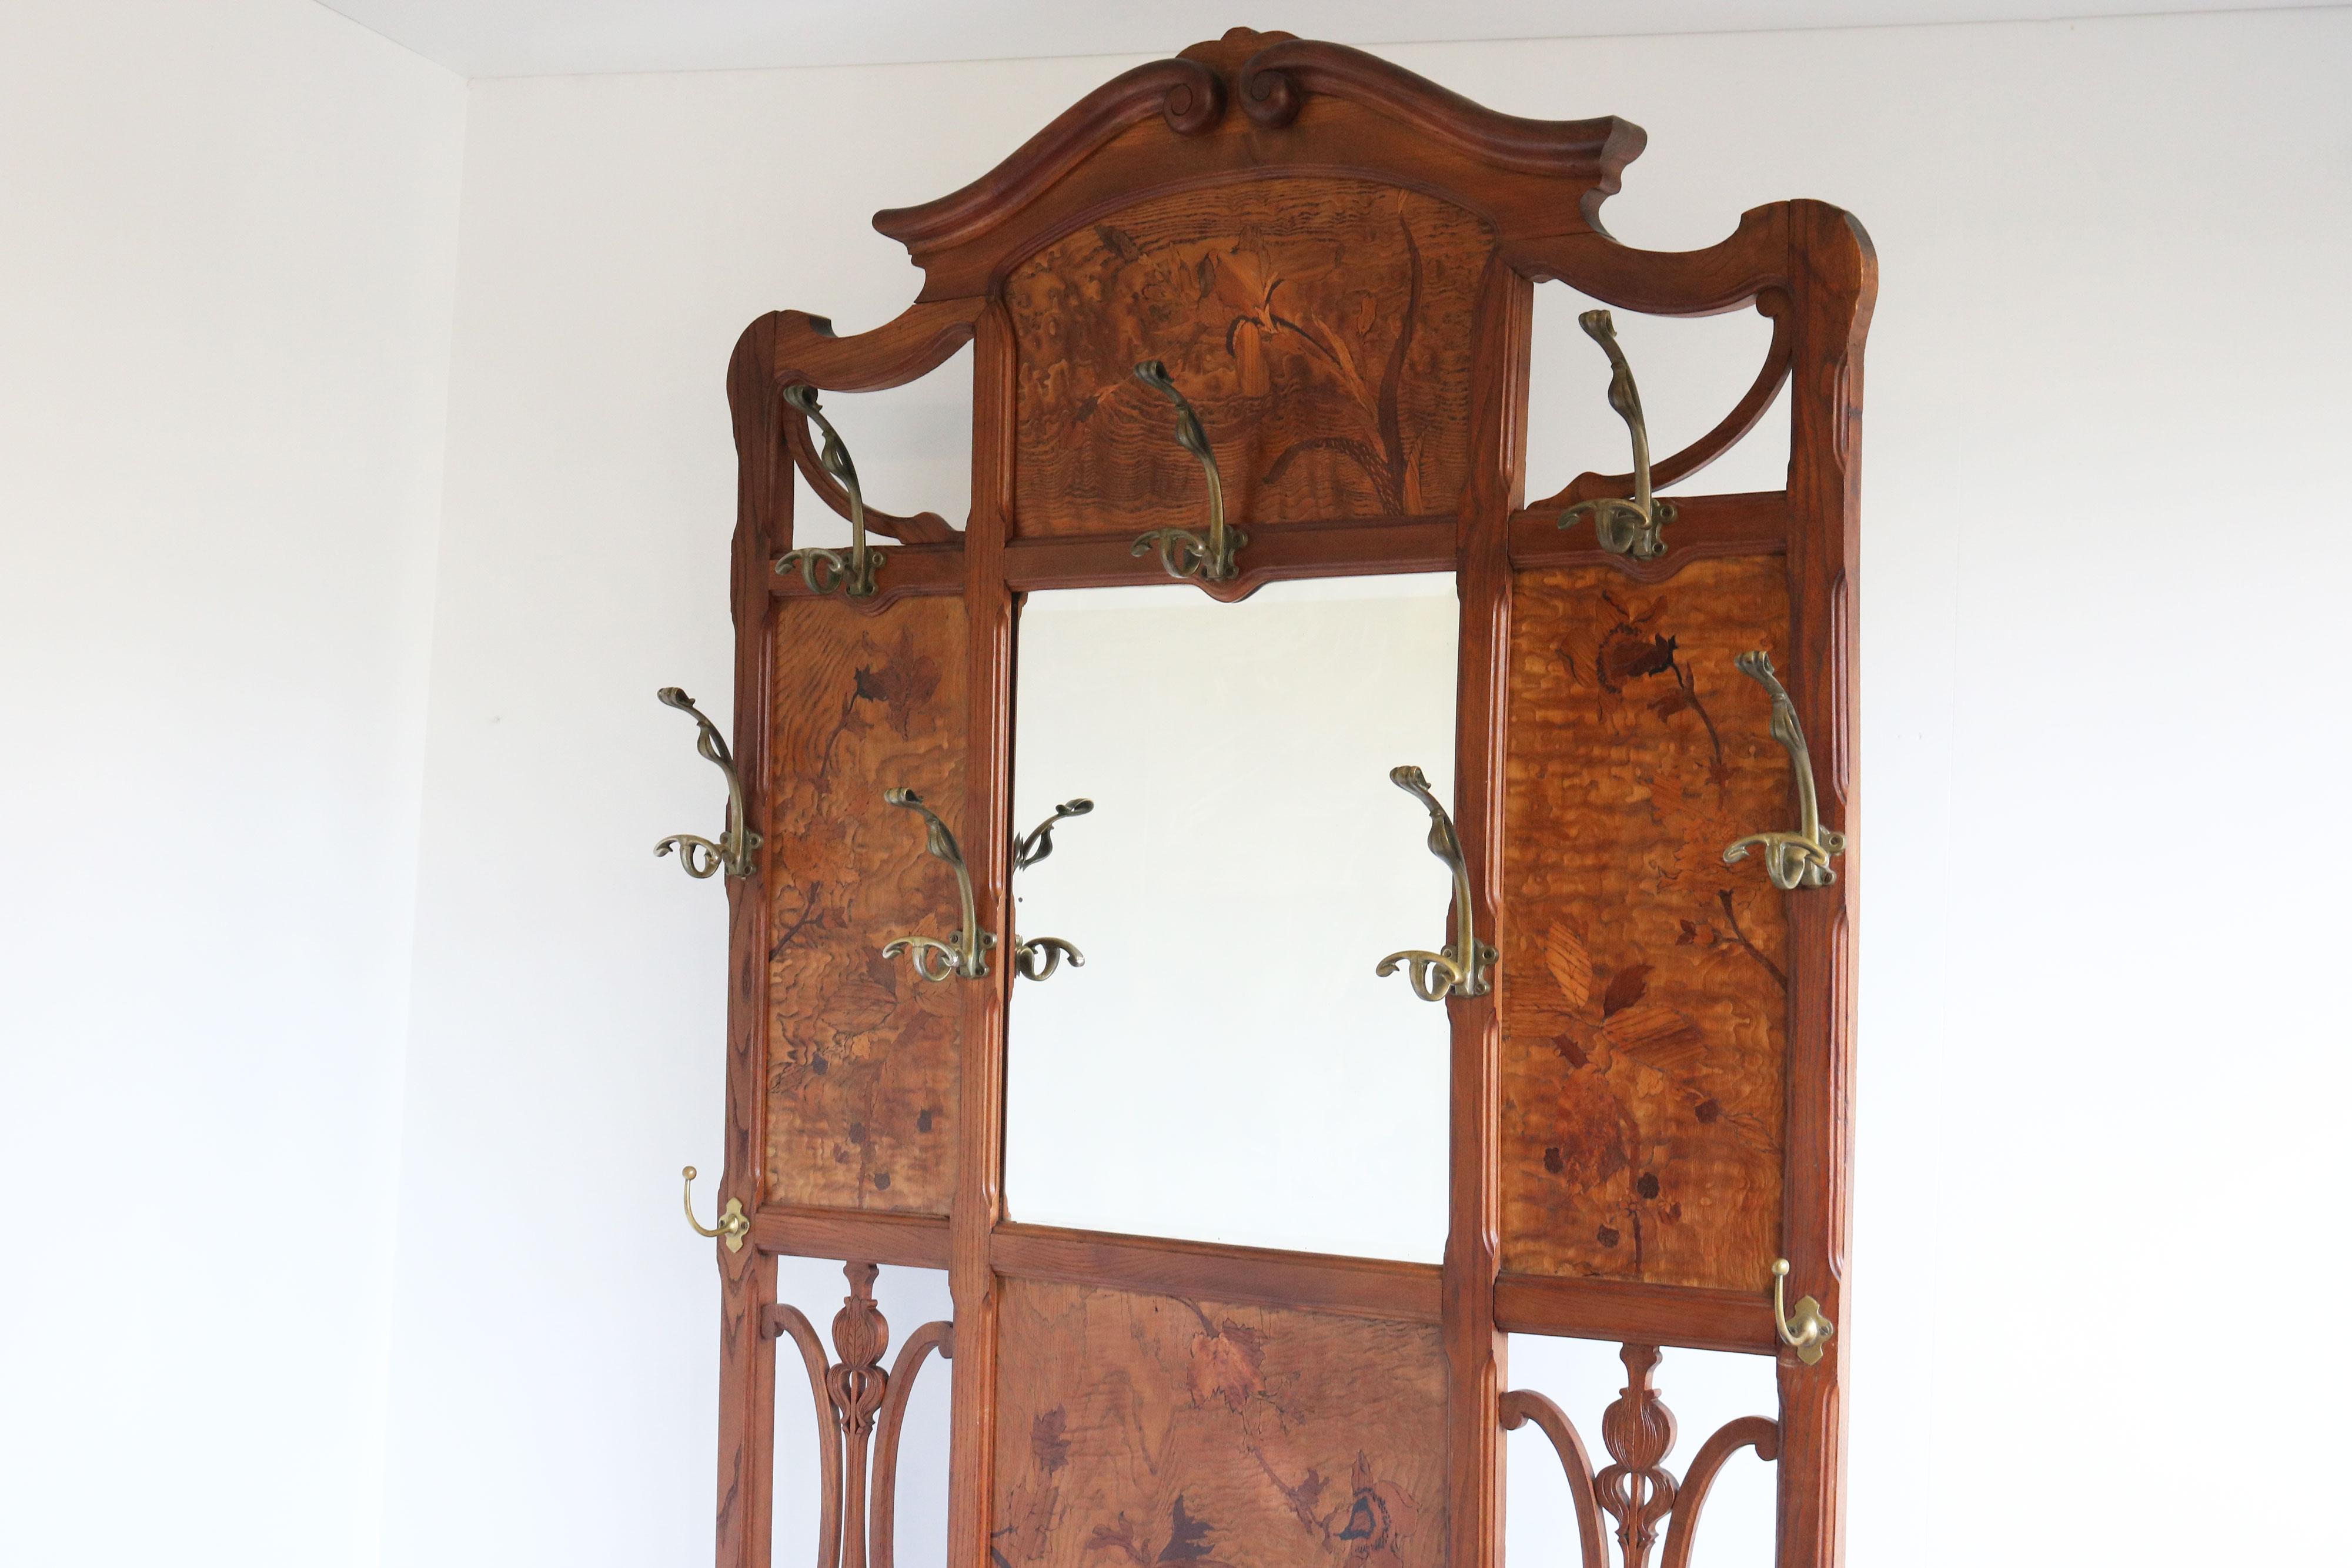 French Art nouveau hall tree / coat rack by Emile galle 1905 marquetry hallway For Sale 8